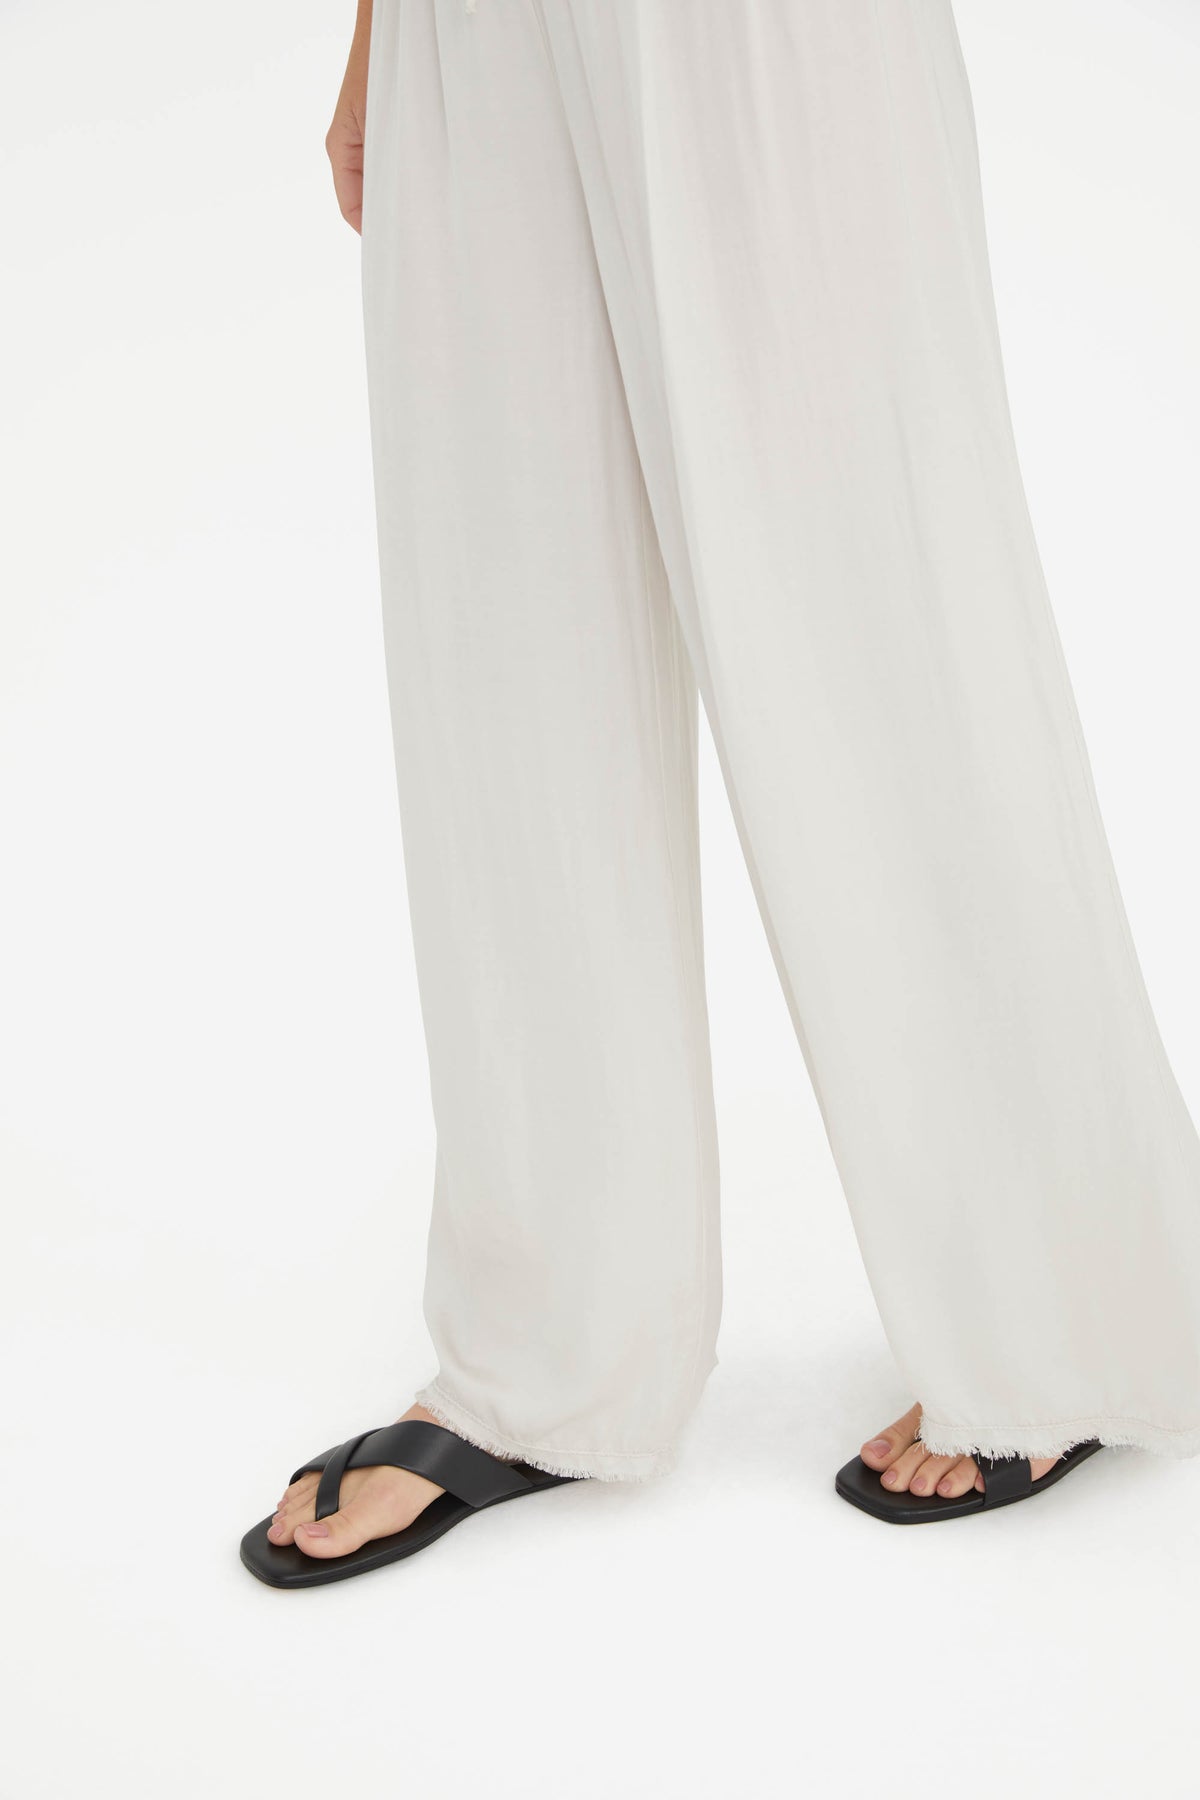 The Rising Satin Pants in Beige - Marché